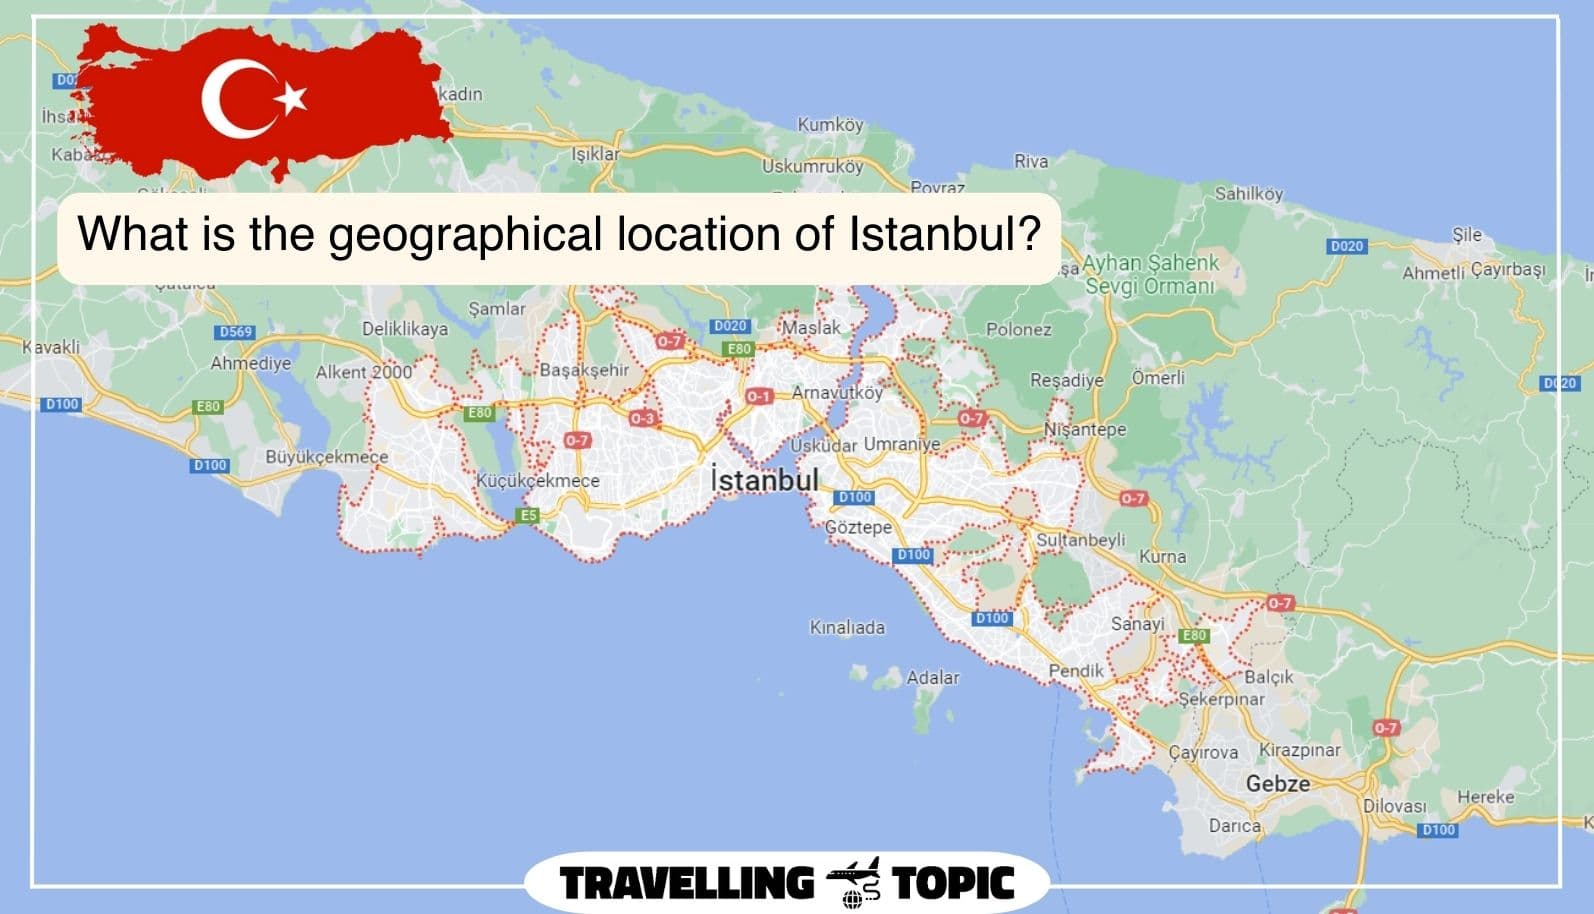 What is the geographical location of Istanbul